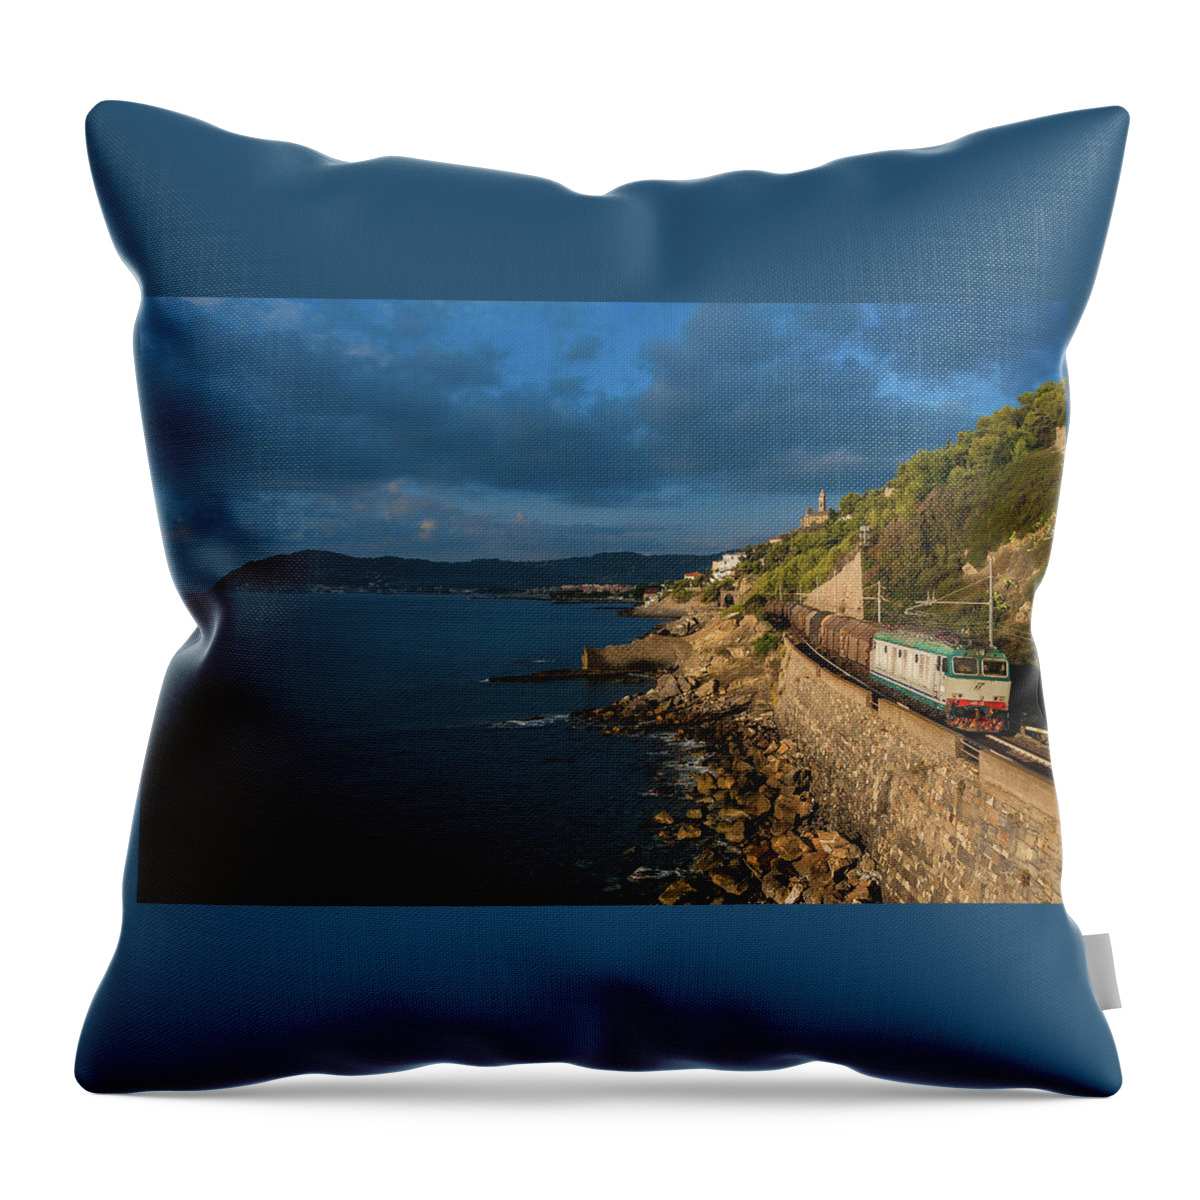 Train Throw Pillow featuring the photograph Missing Railway by Andrea Sosio